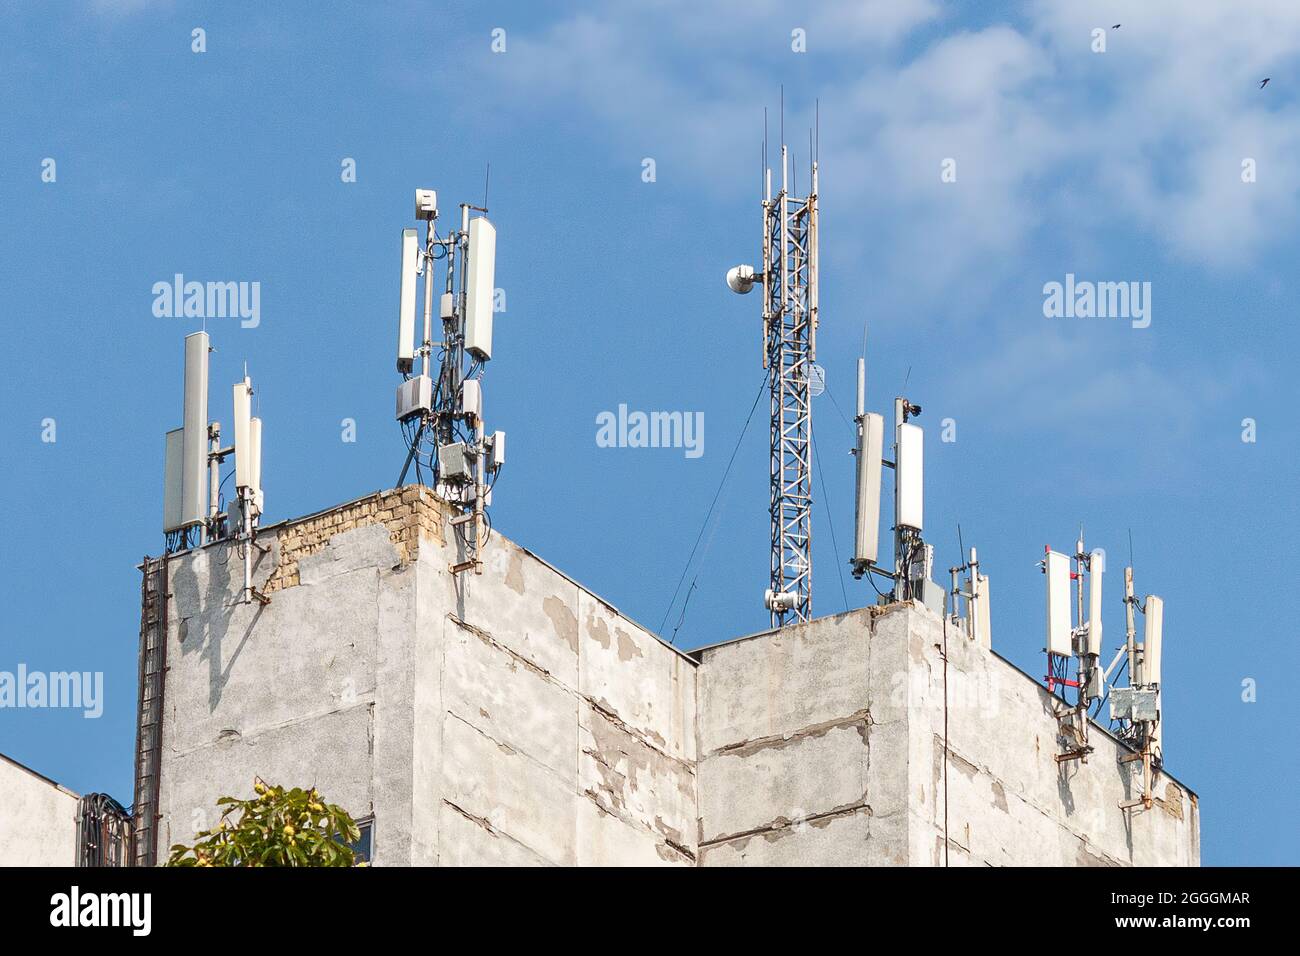 Telecommunication tower with 5G cellular network antenna on city background Stock Photo